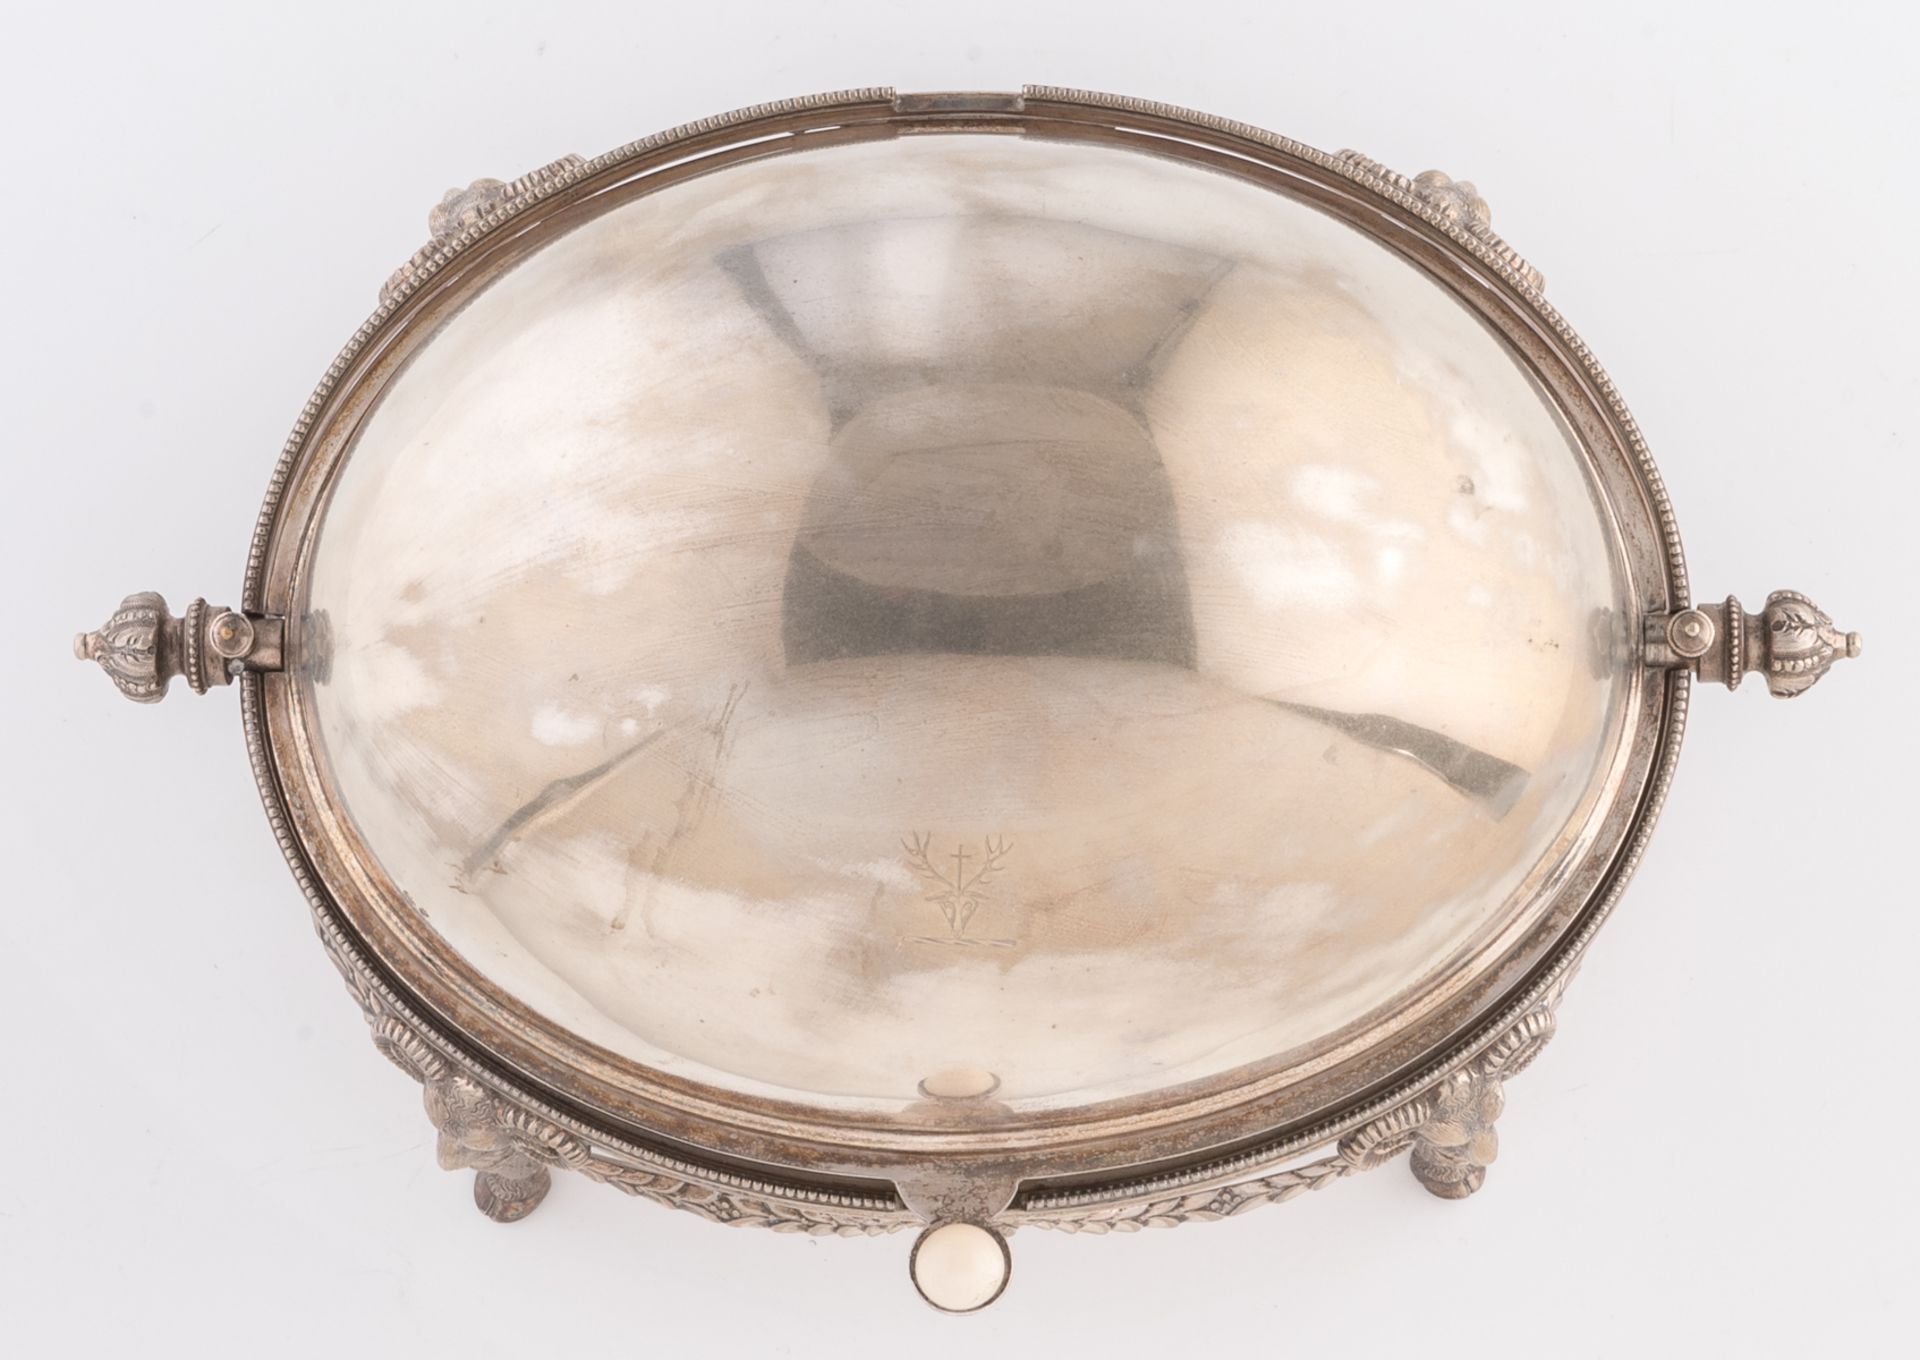 An English silver plated neoclassical covered caviar server with a bone handle, H 25 - W 38 - D 24 c - Bild 6 aus 10